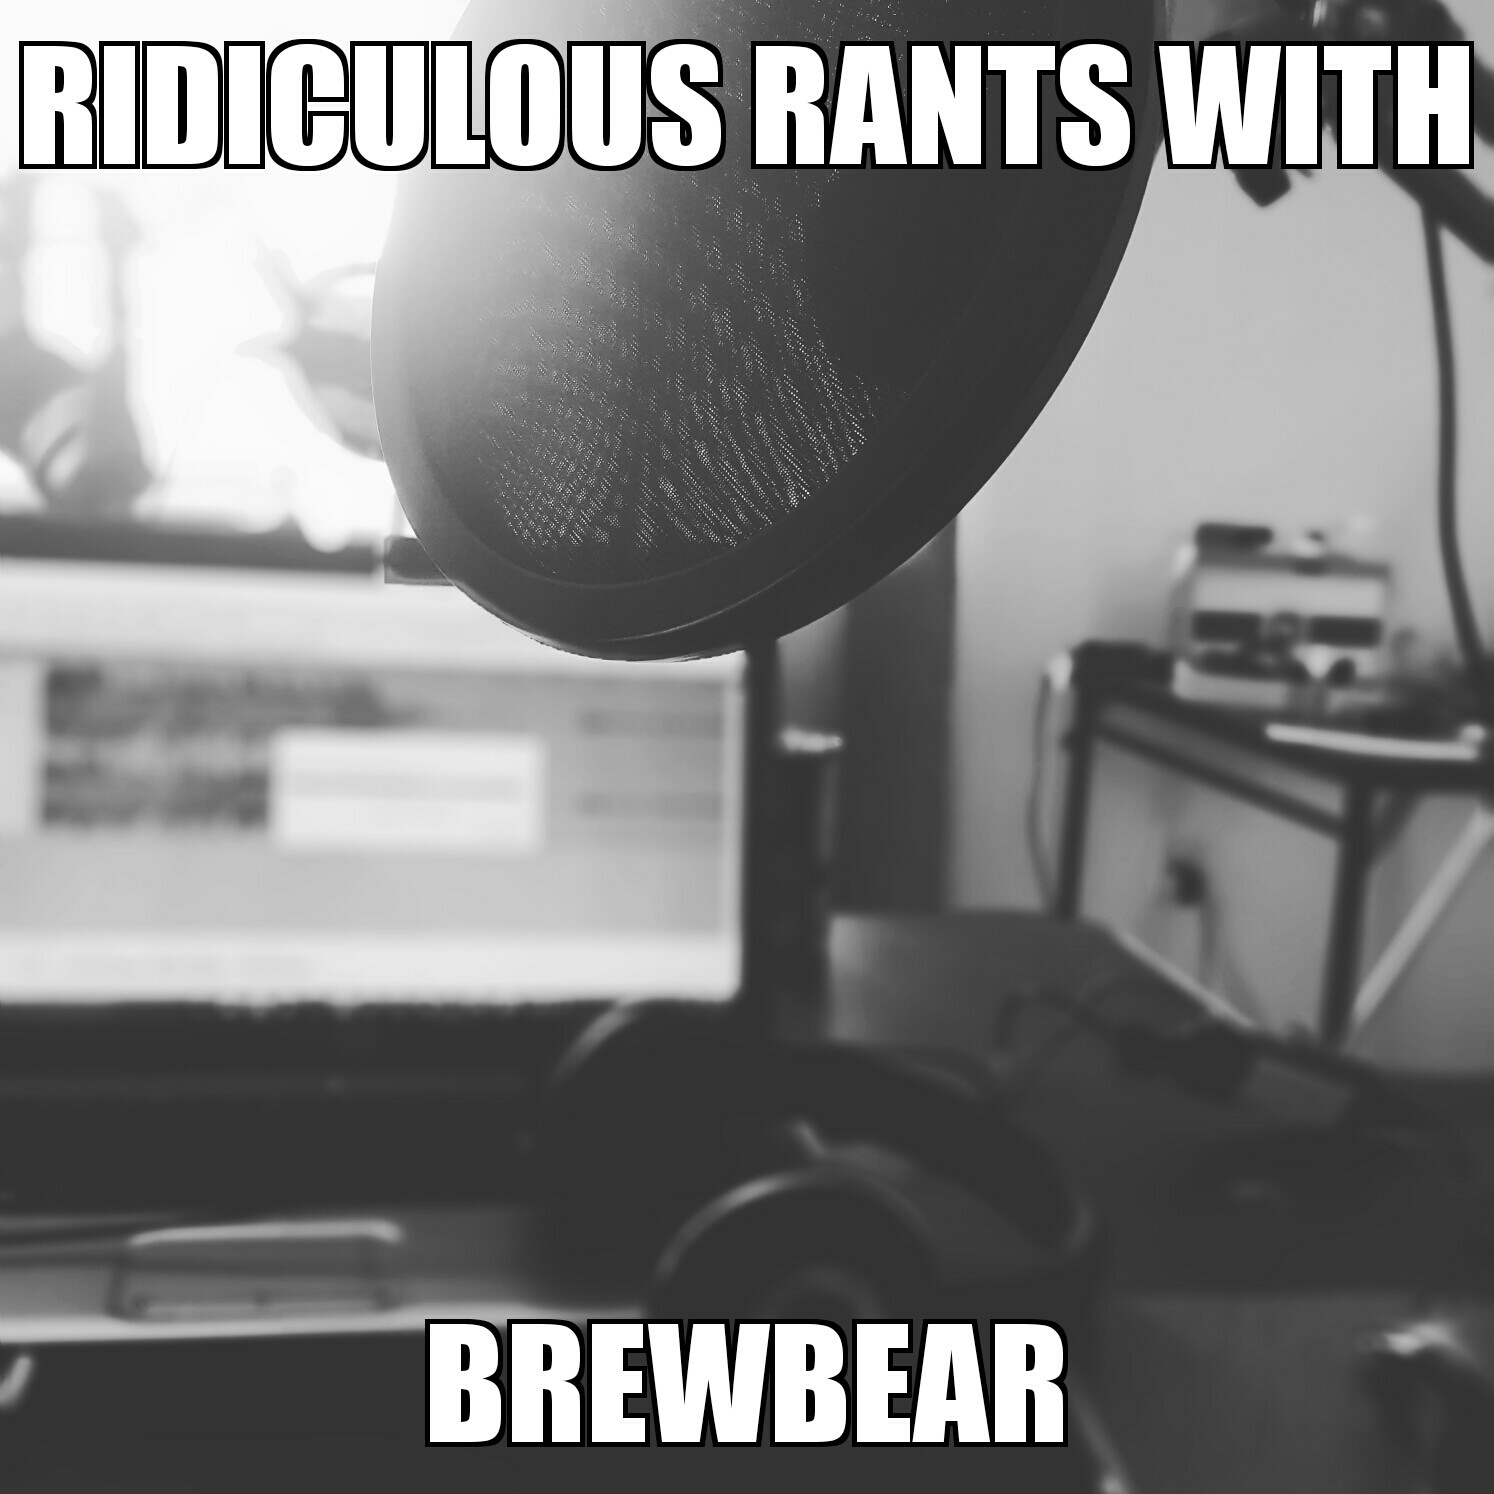 Ridiculous Rants with Brewbear